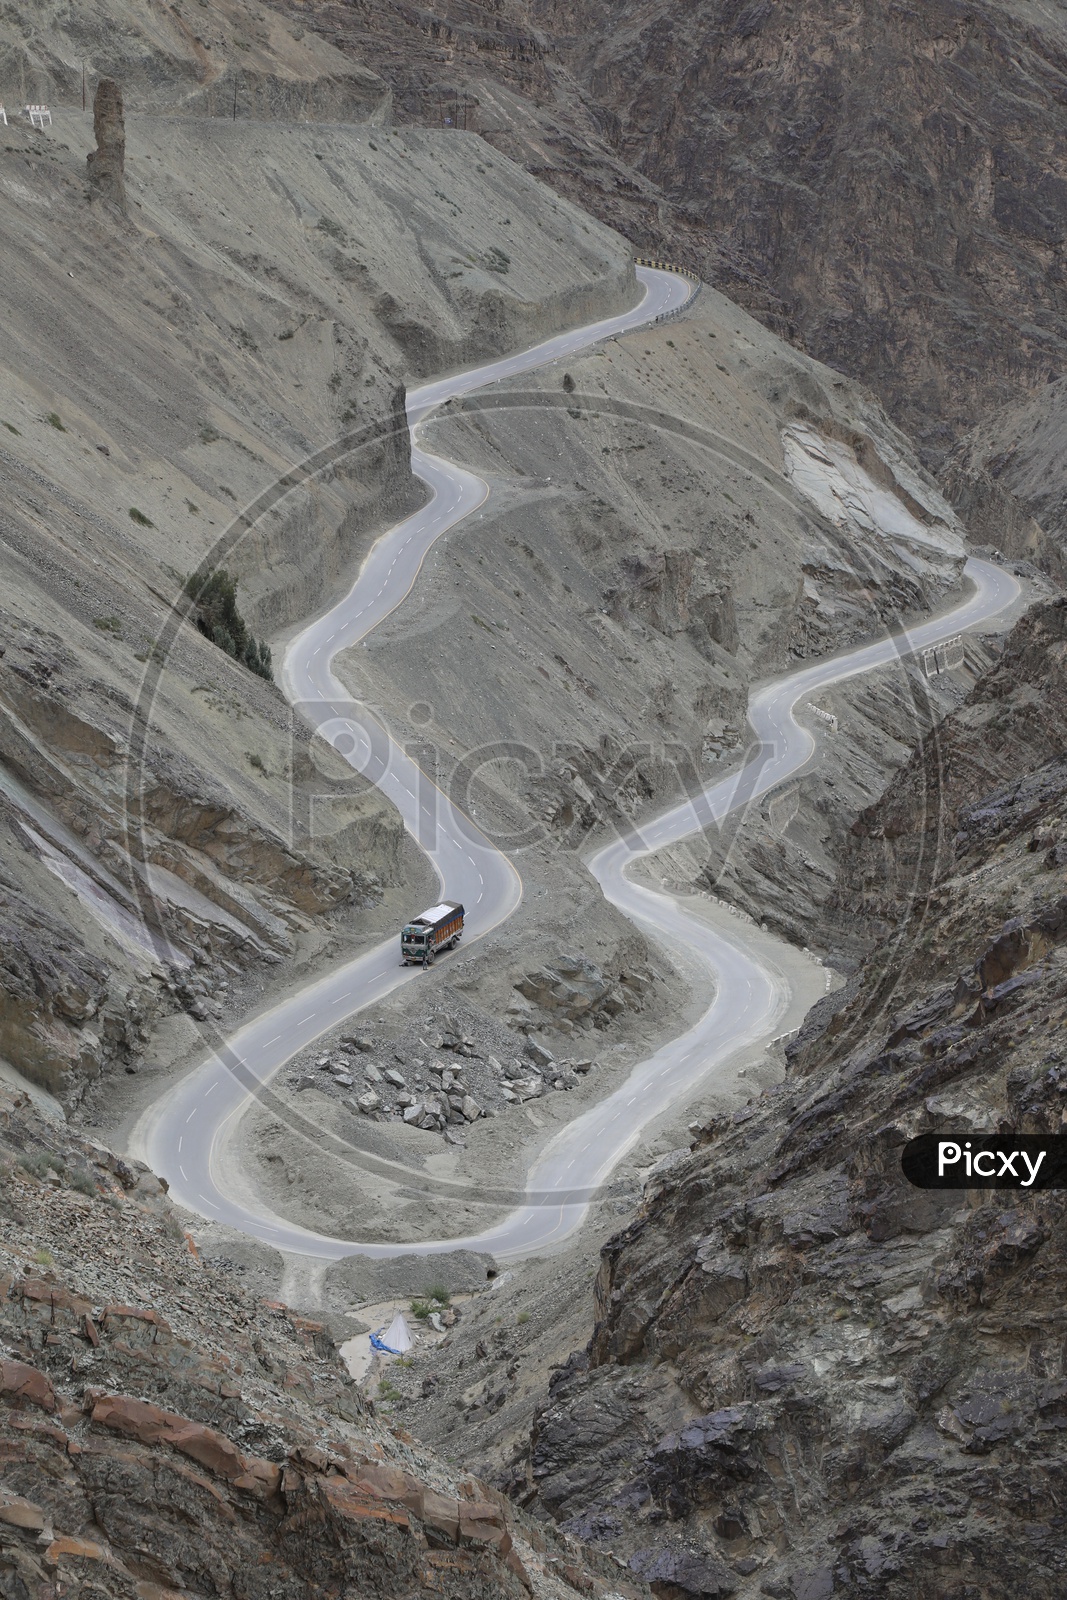 Roadways of Leh with Beautiful Mountains / Lorry traveling on Leh roads